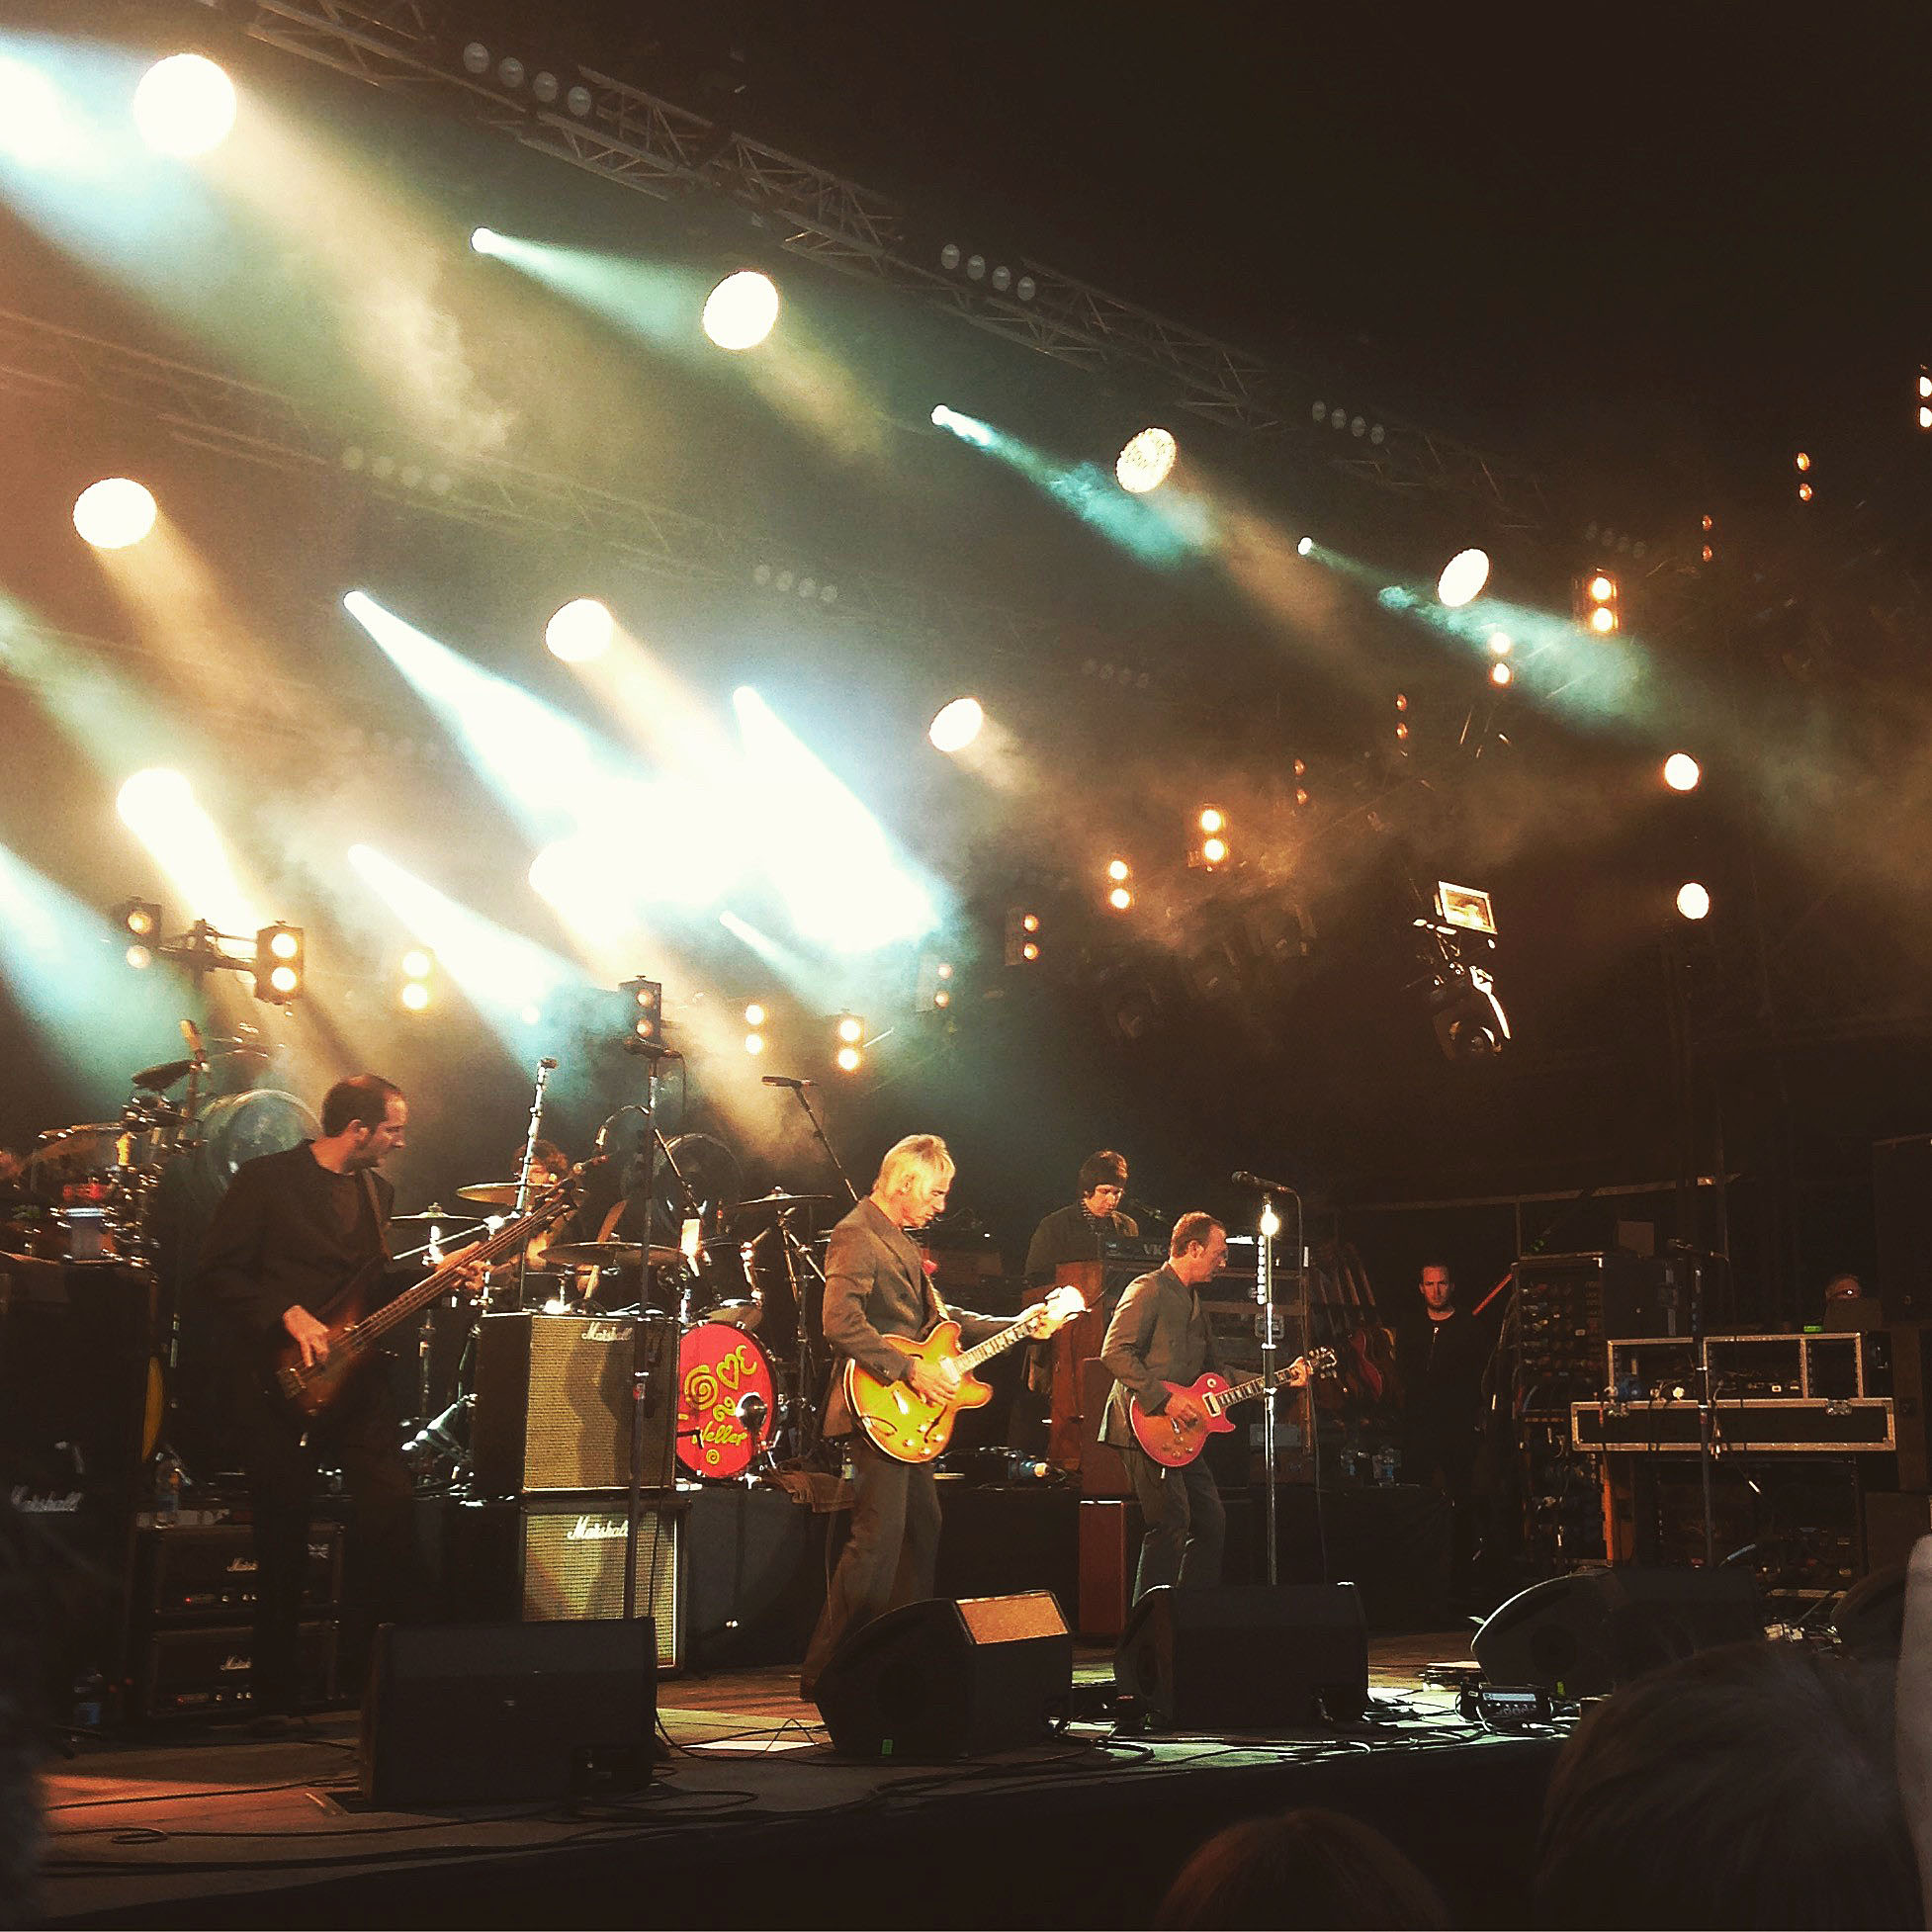 Photograph of musician Paul Weller and his band, taken from 